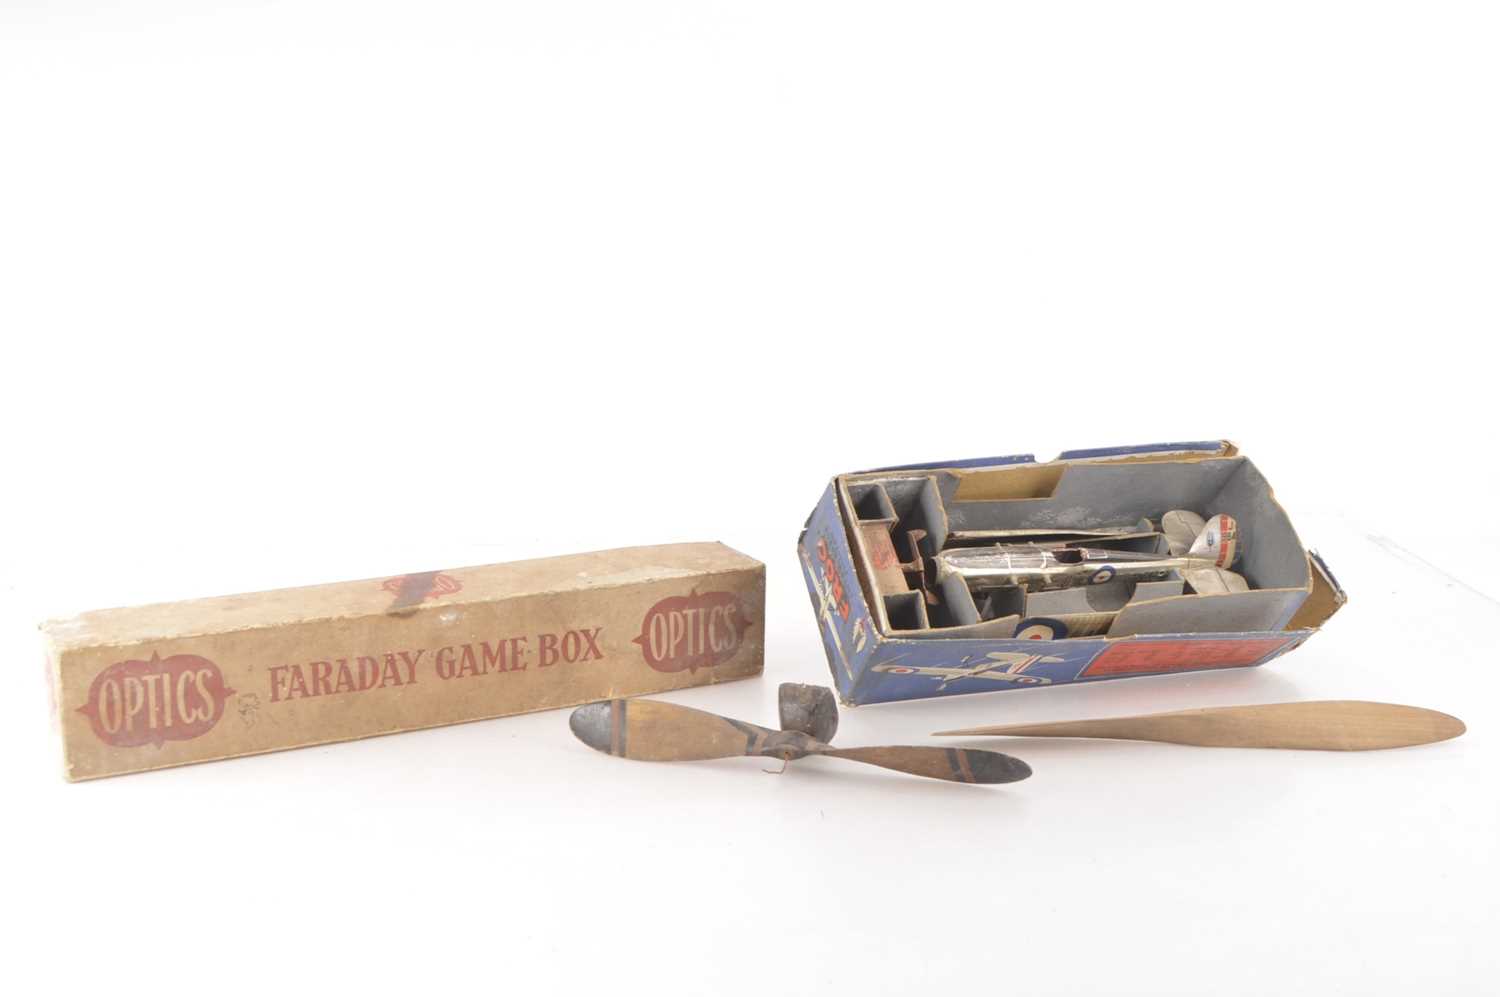 Philips Electrical Engineering Set Optics Faraday Game Box and Frog Aircraft and propellers (5),